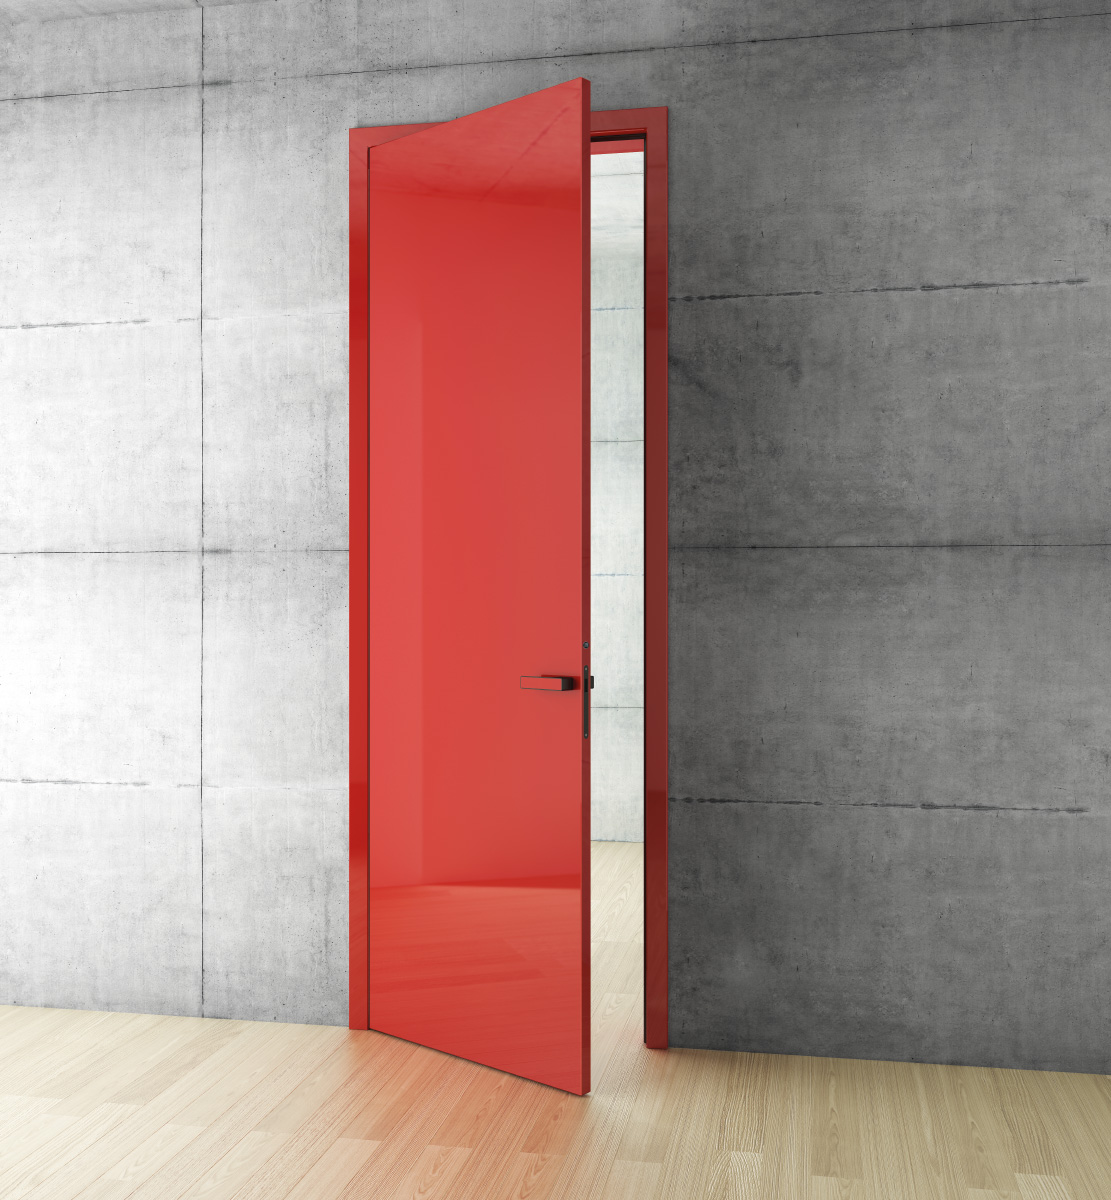 Quality Millenium interior doors by HANÁK in red lacquer.